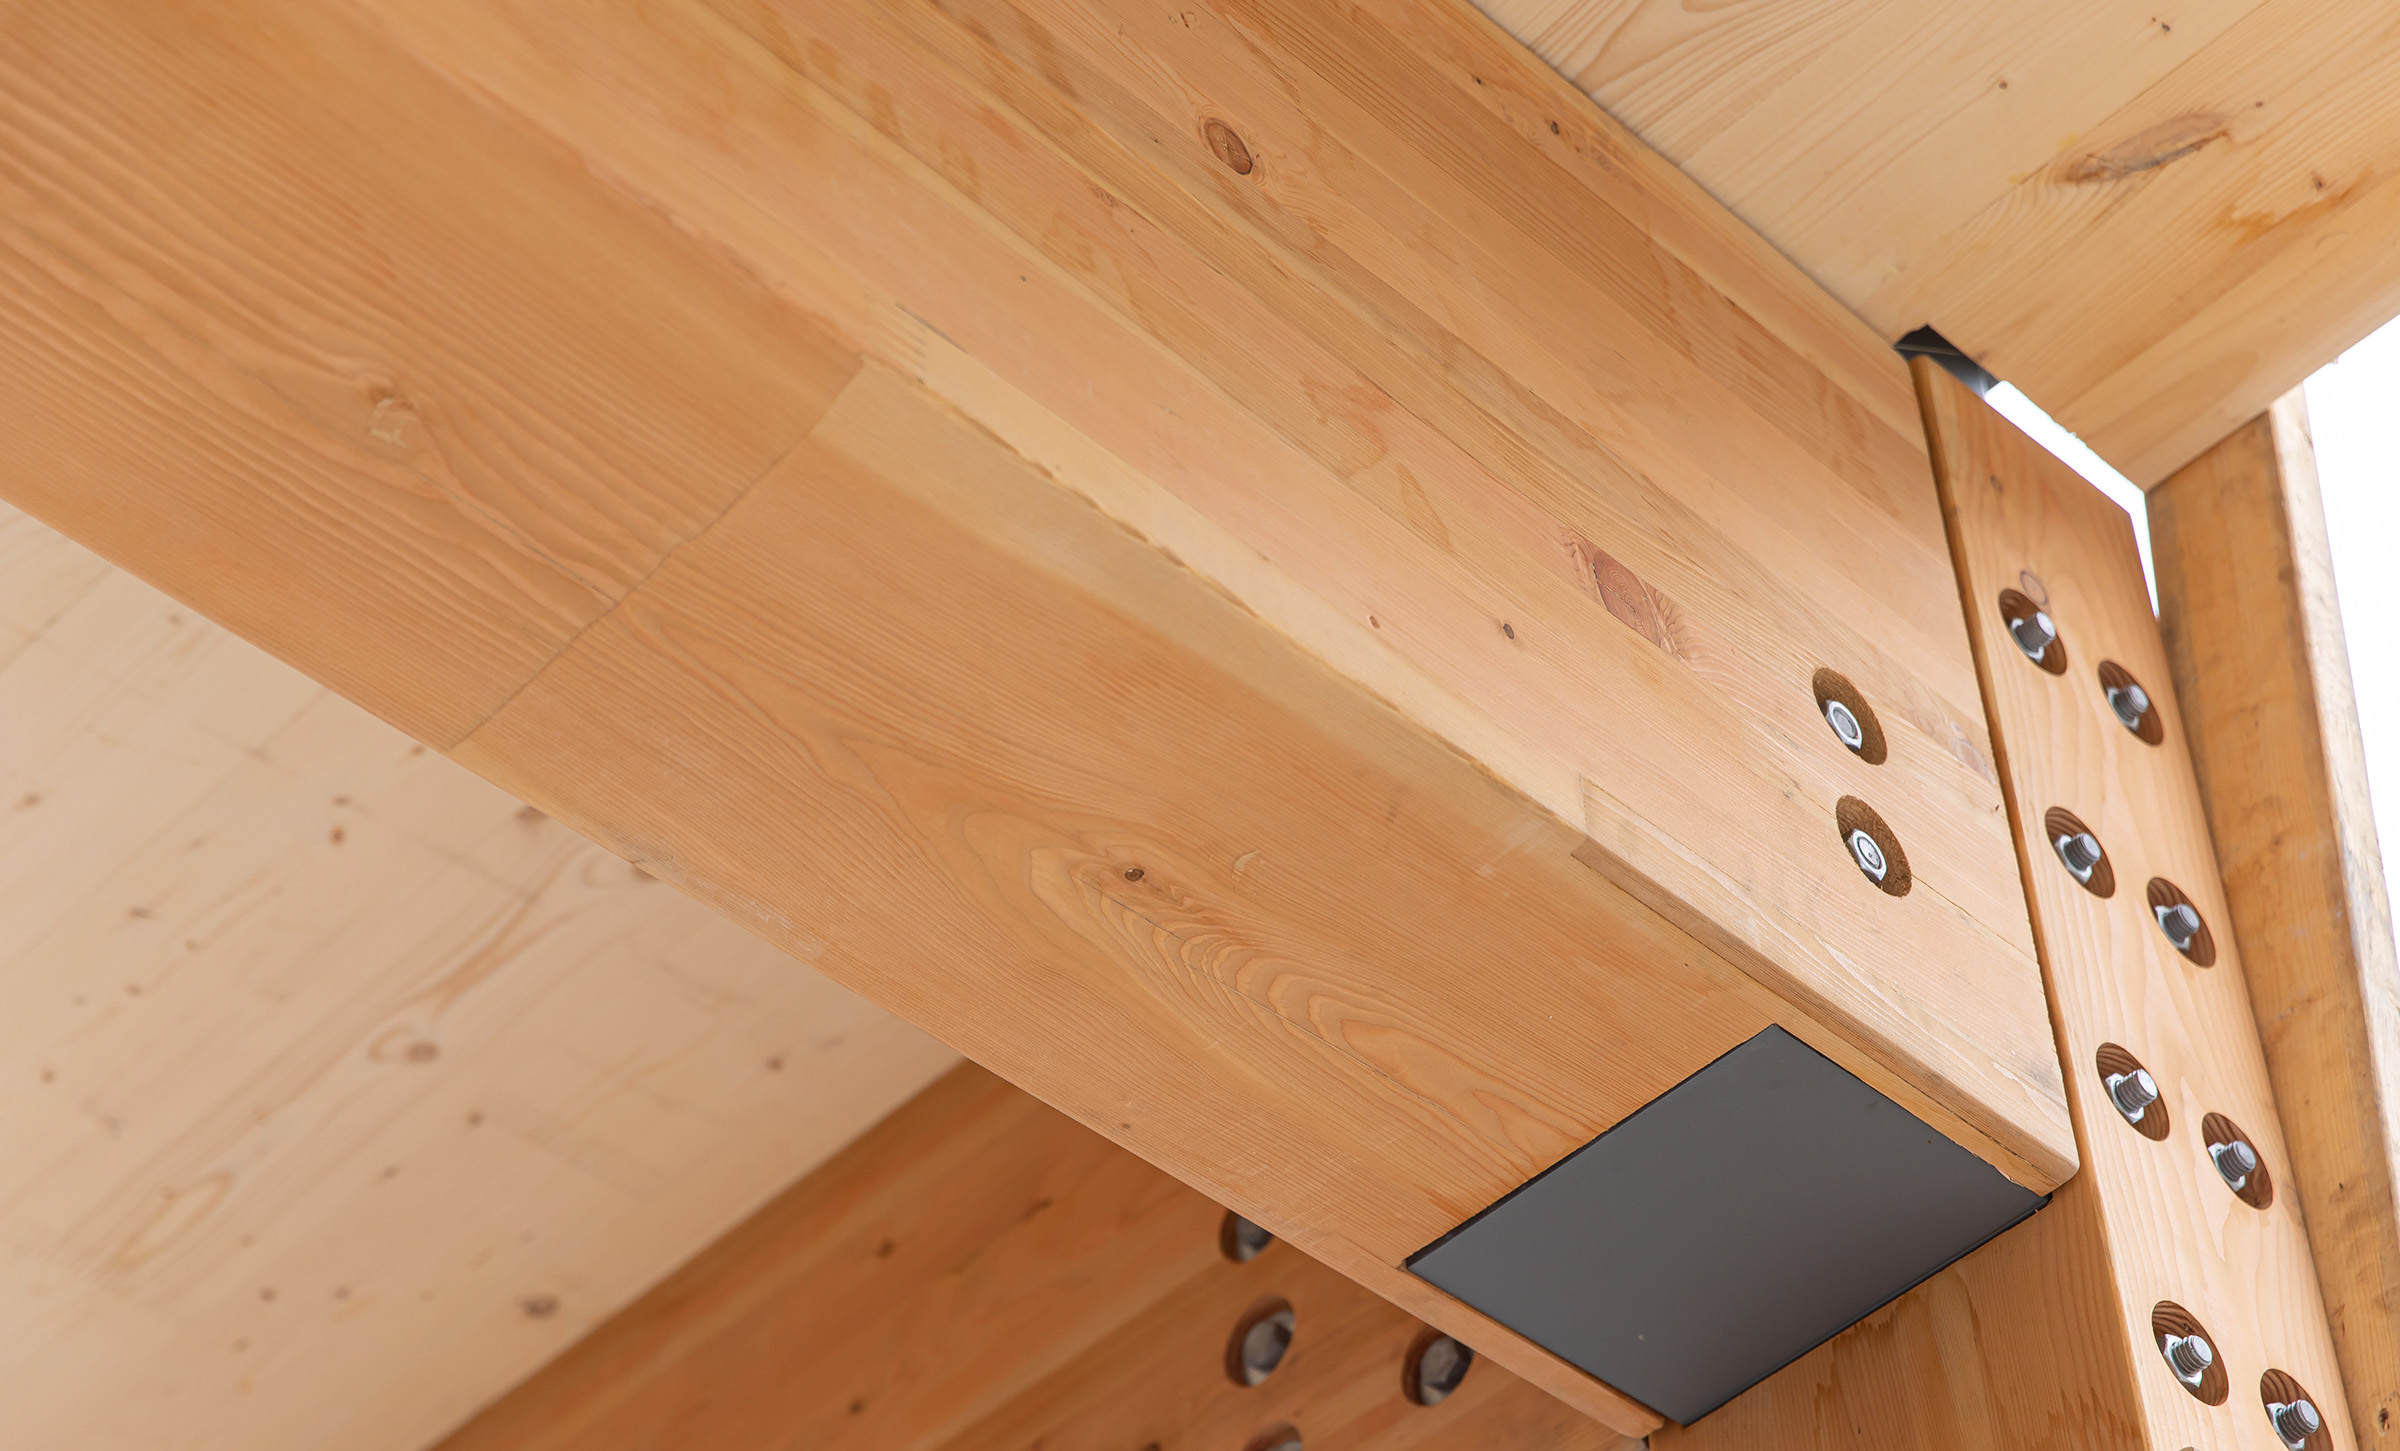 Detail of a glulam beam structural connection